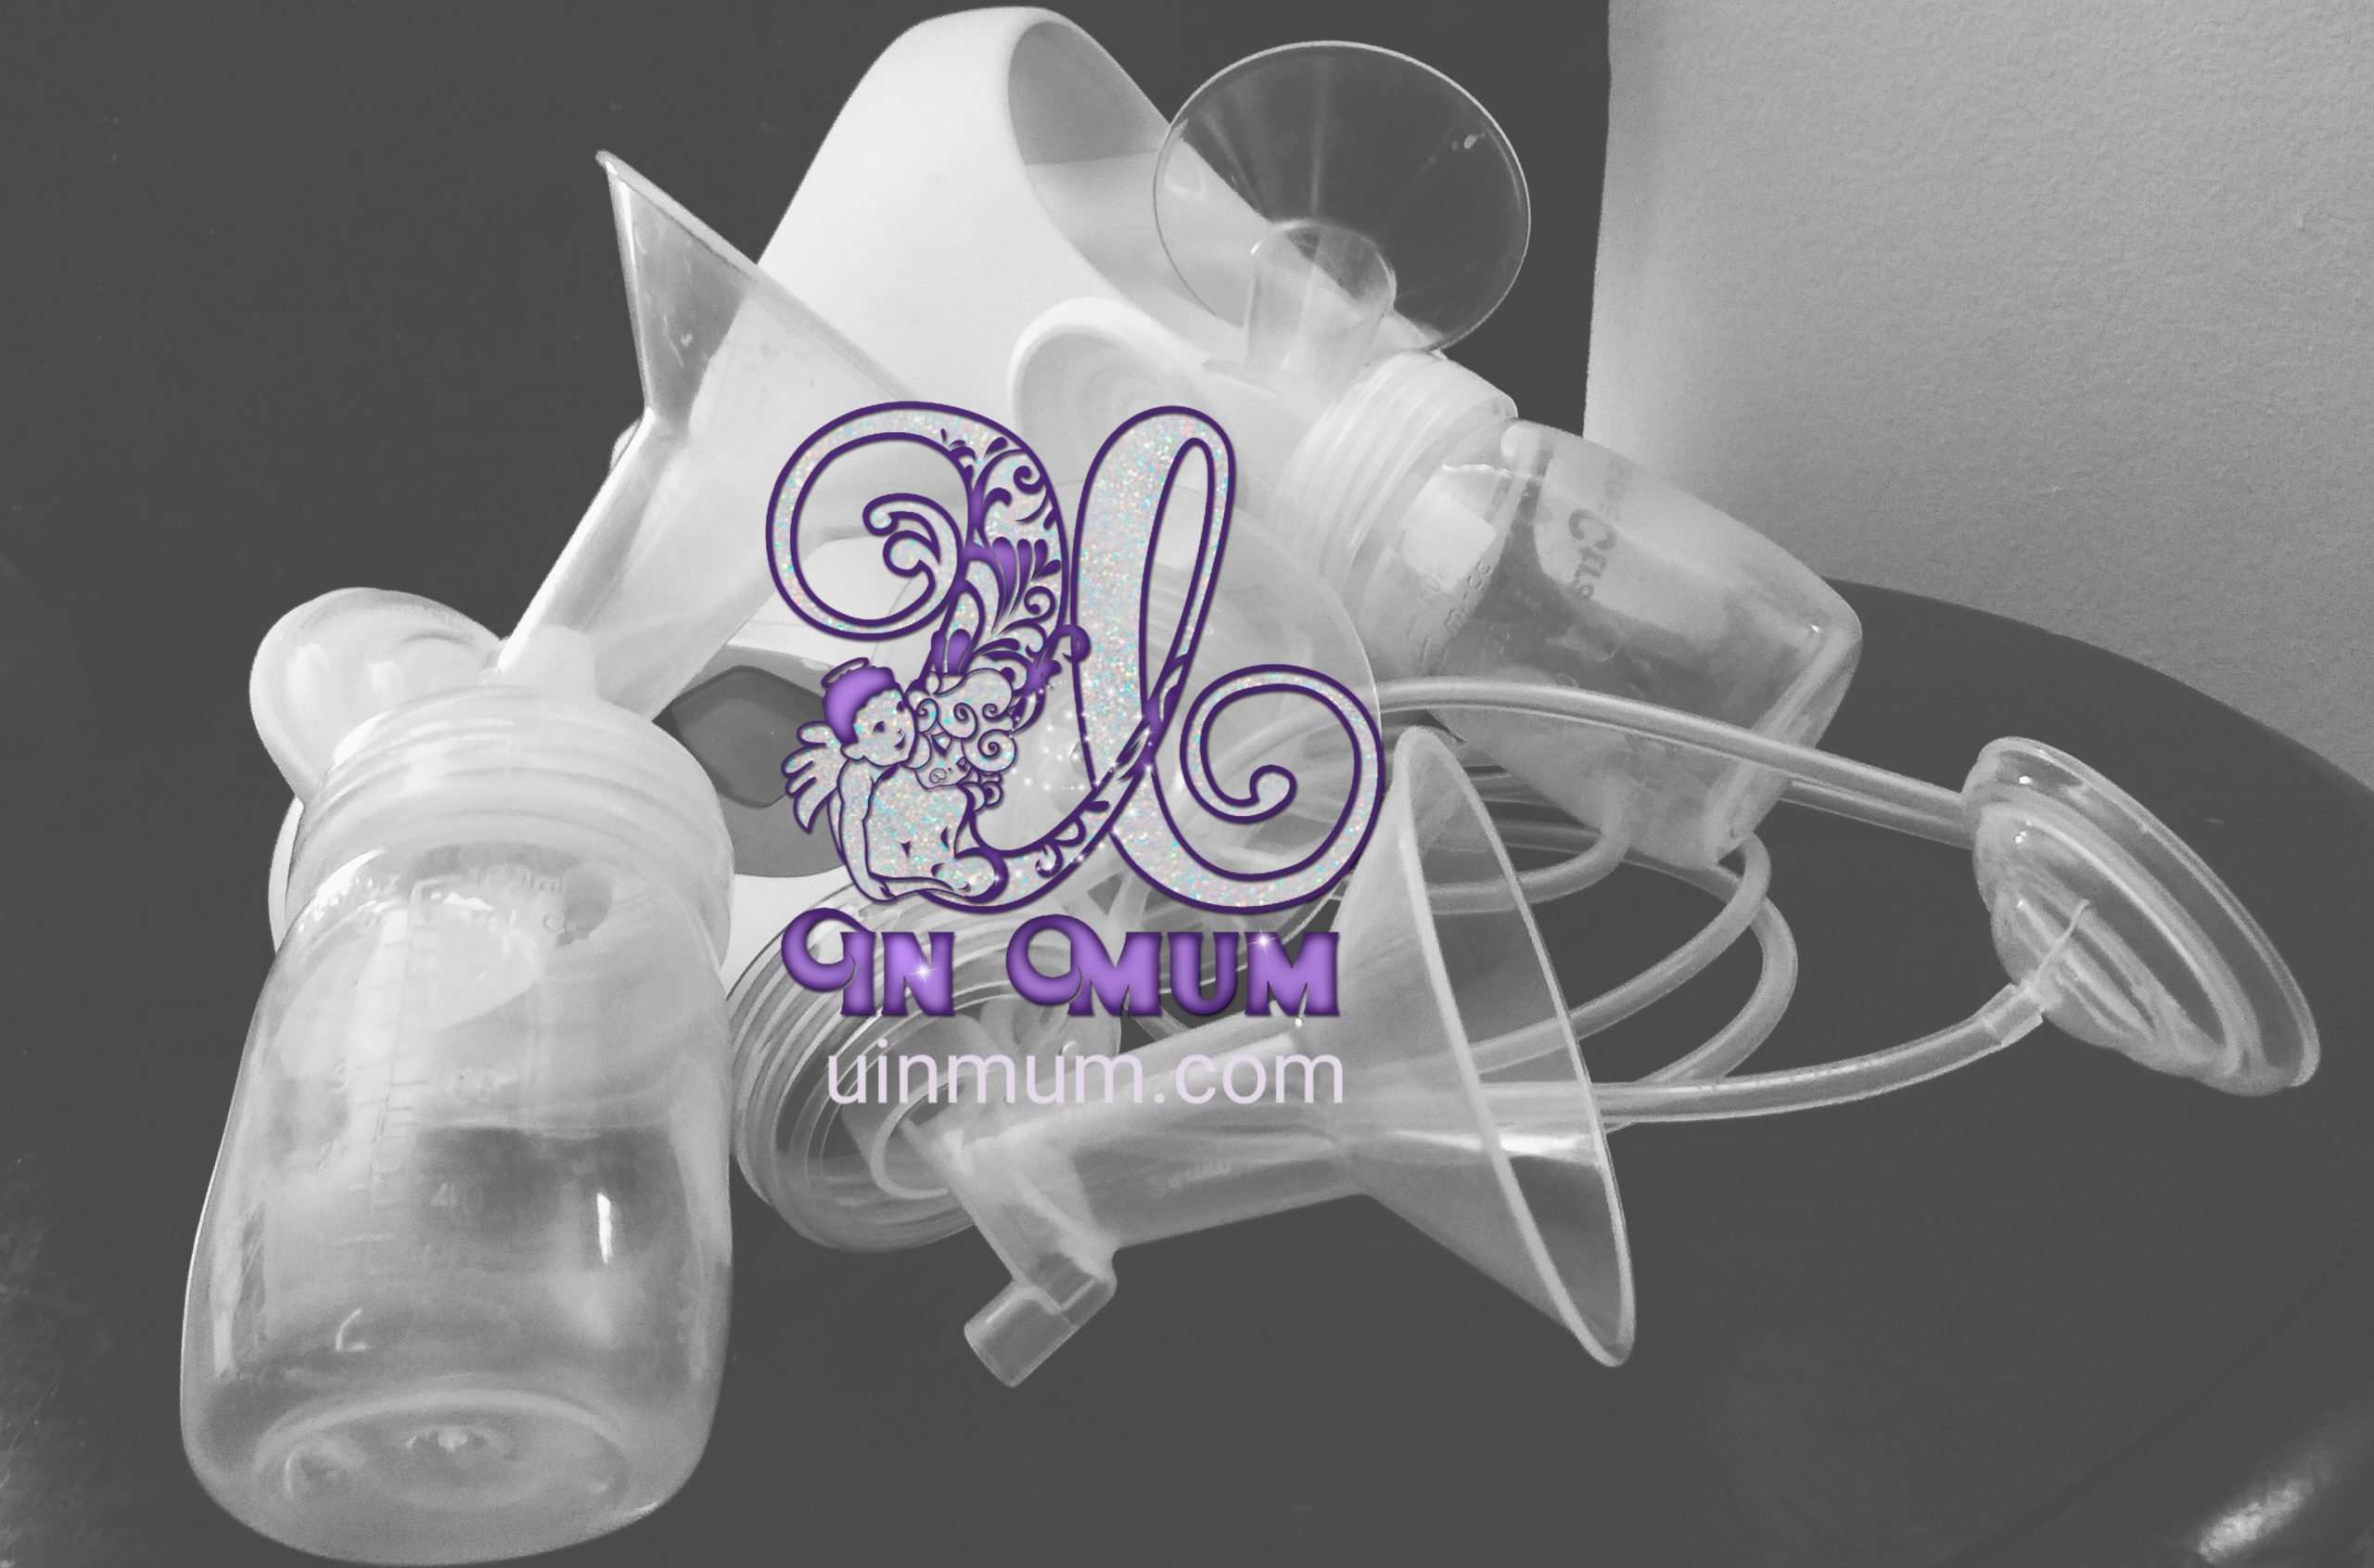 10 Things to Consider When Deciding on a Breast Pump